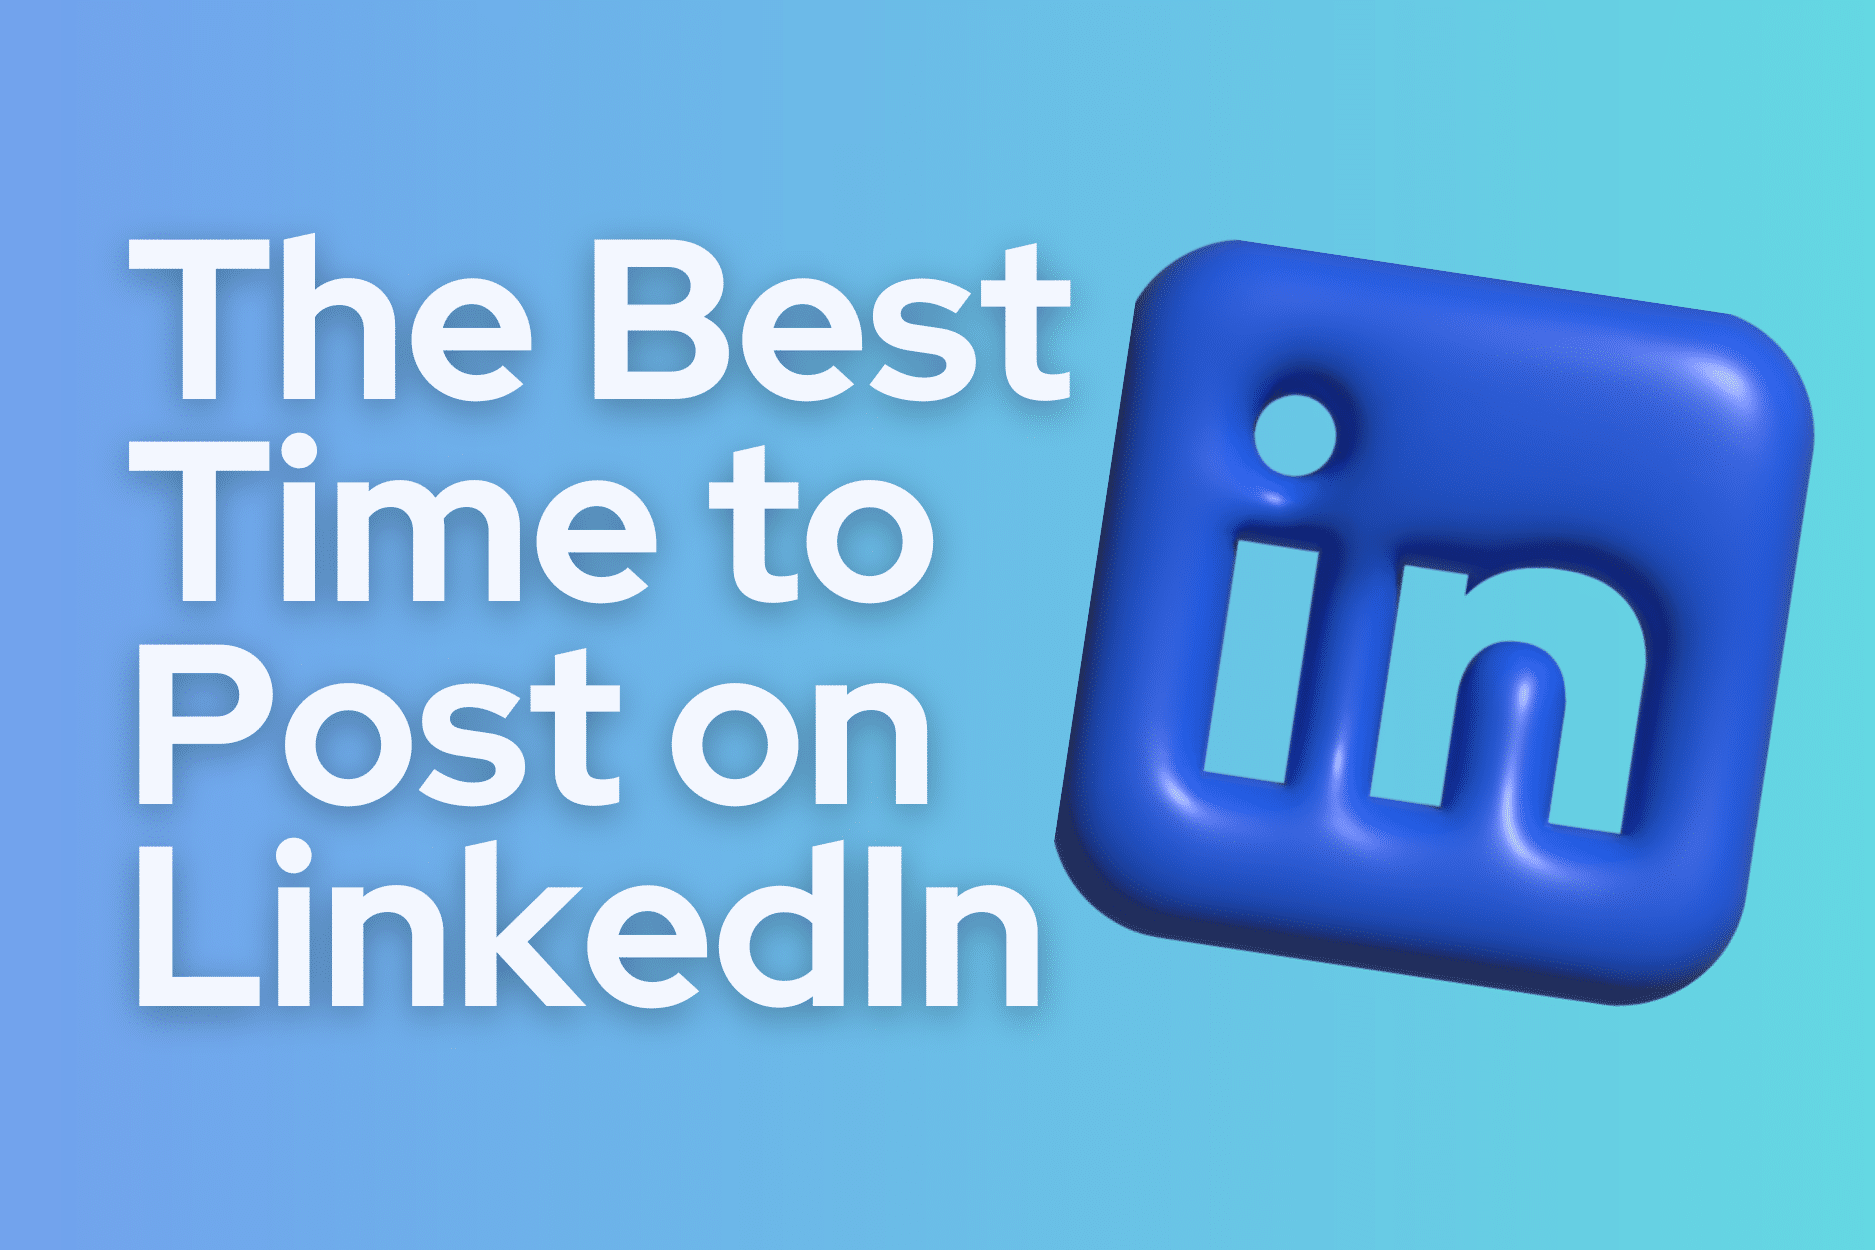 The Ultimate Guide: Finding the Best Time to Post on LinkedIn for Effective Online Marketing in Edmonton